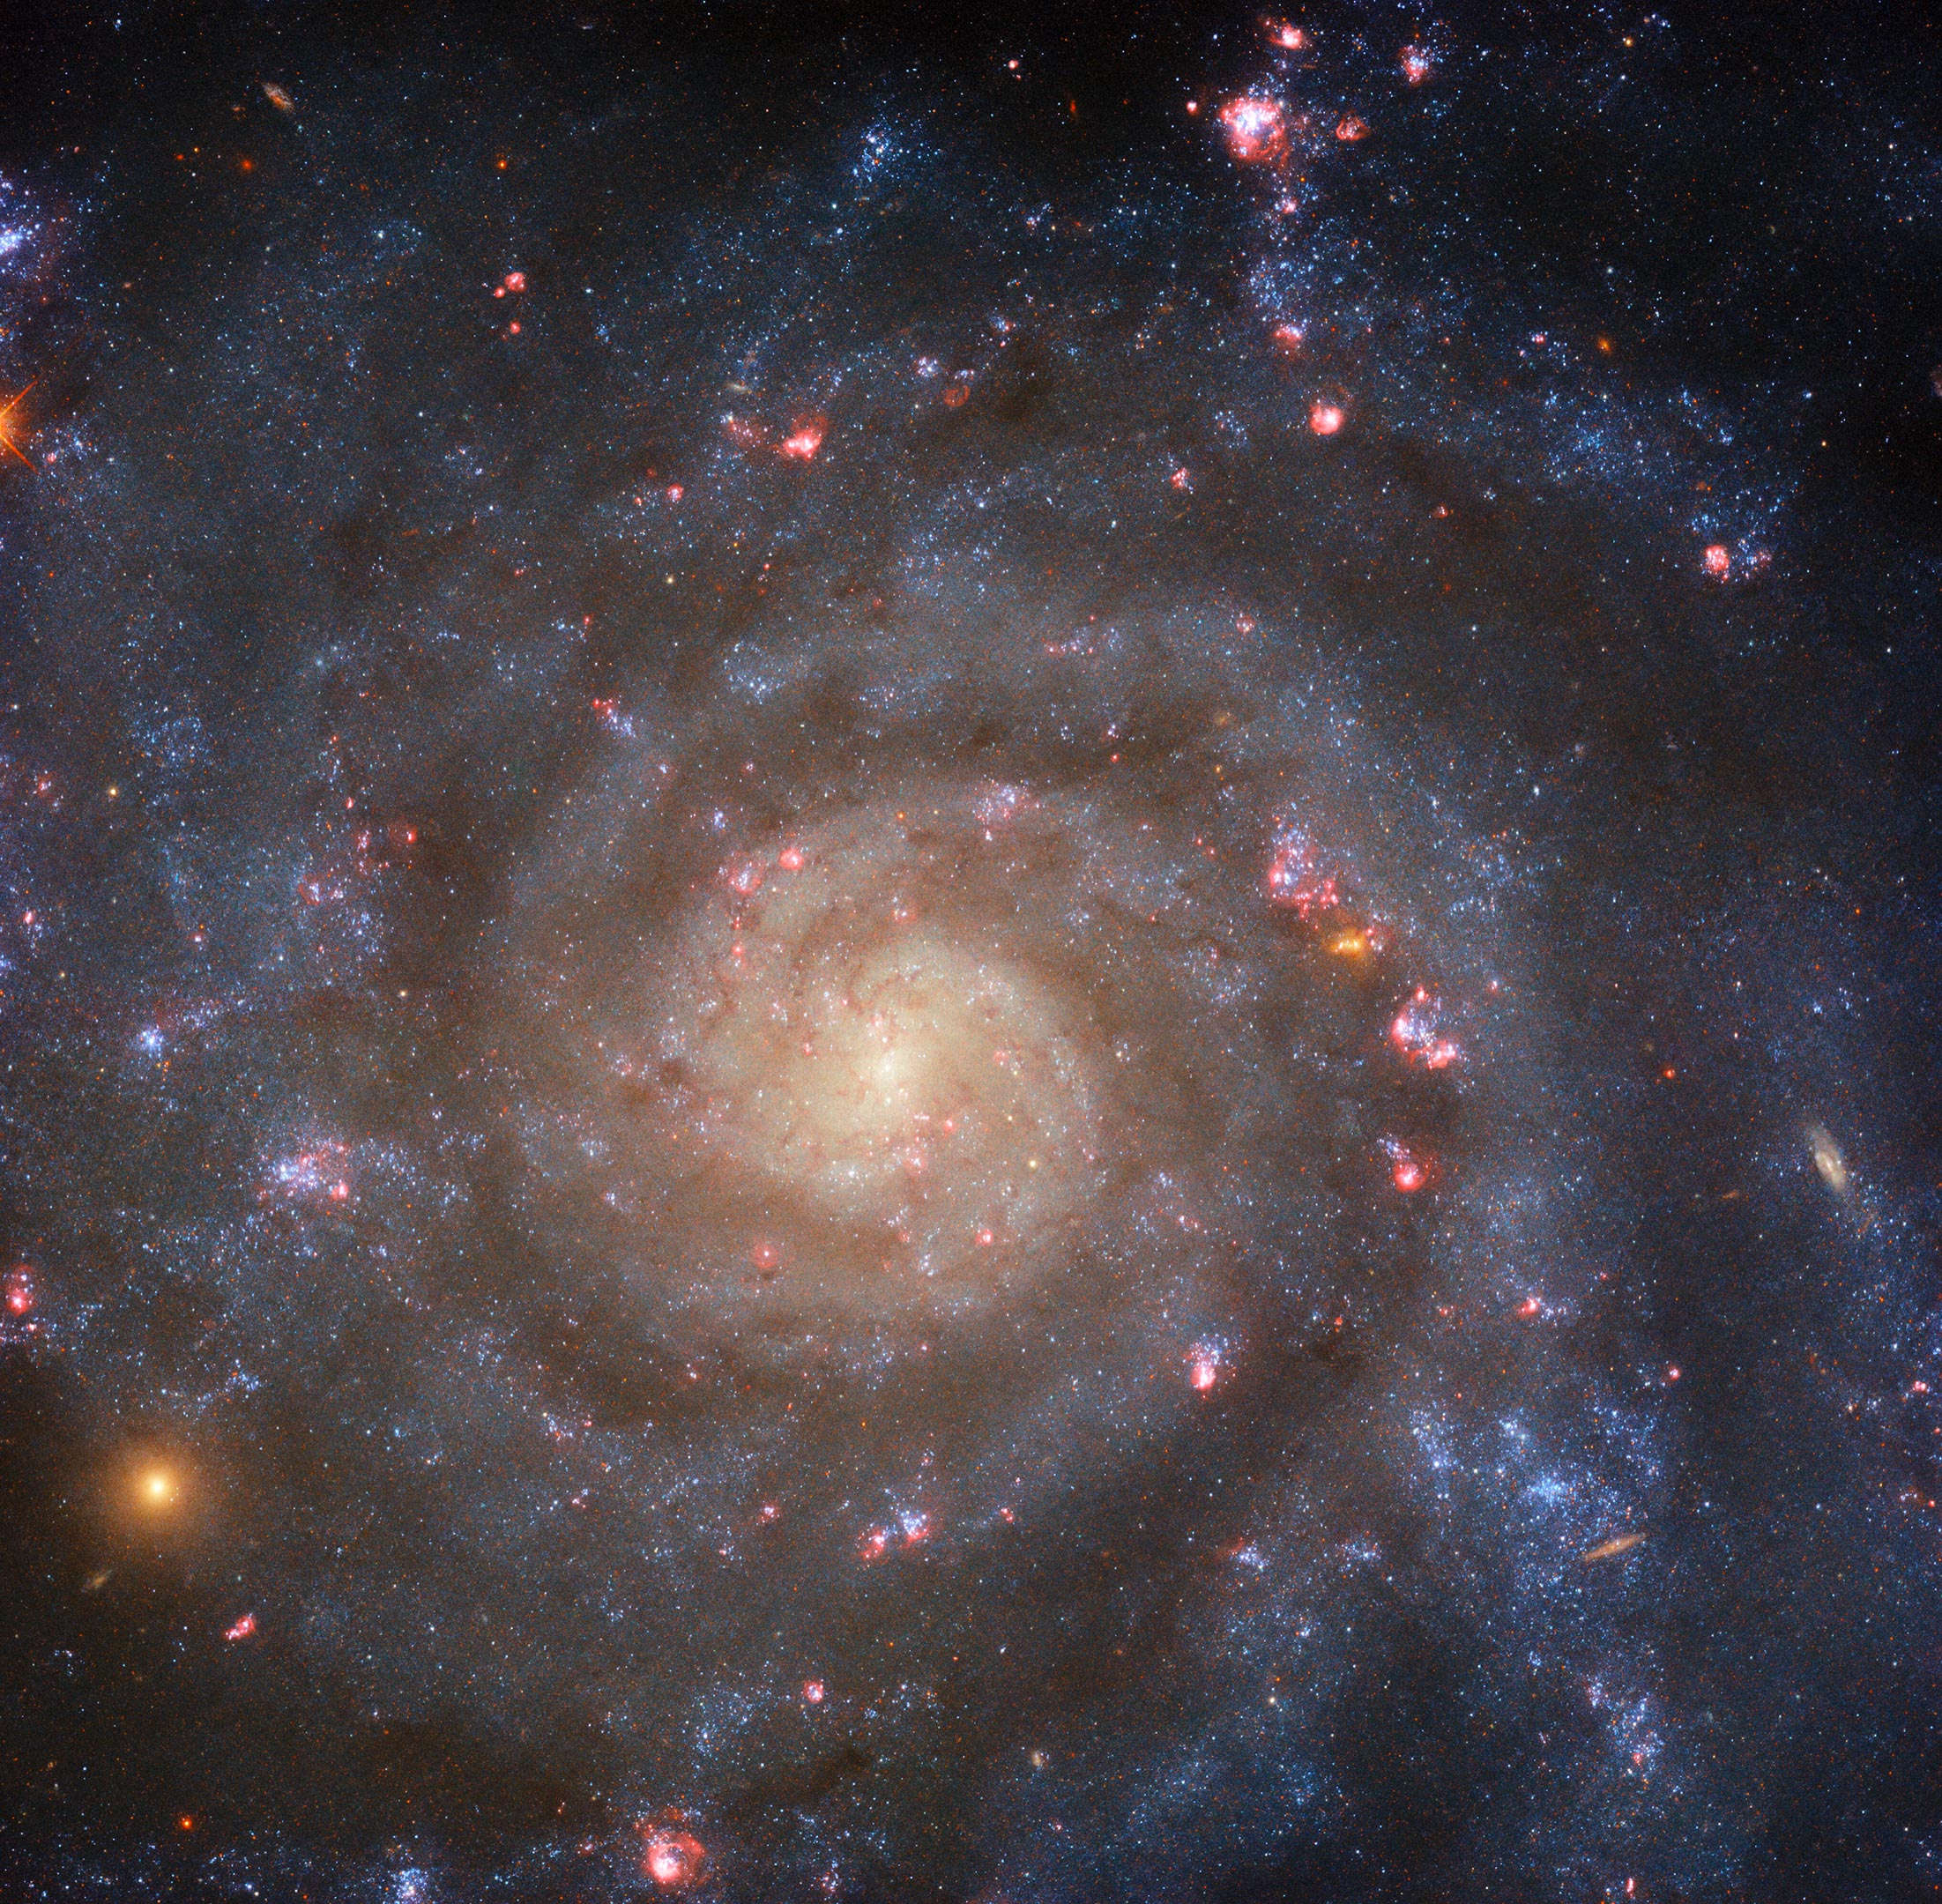 From Face-On to Edge-On: The Spiral Story of a Stunning Galaxy thumbnail